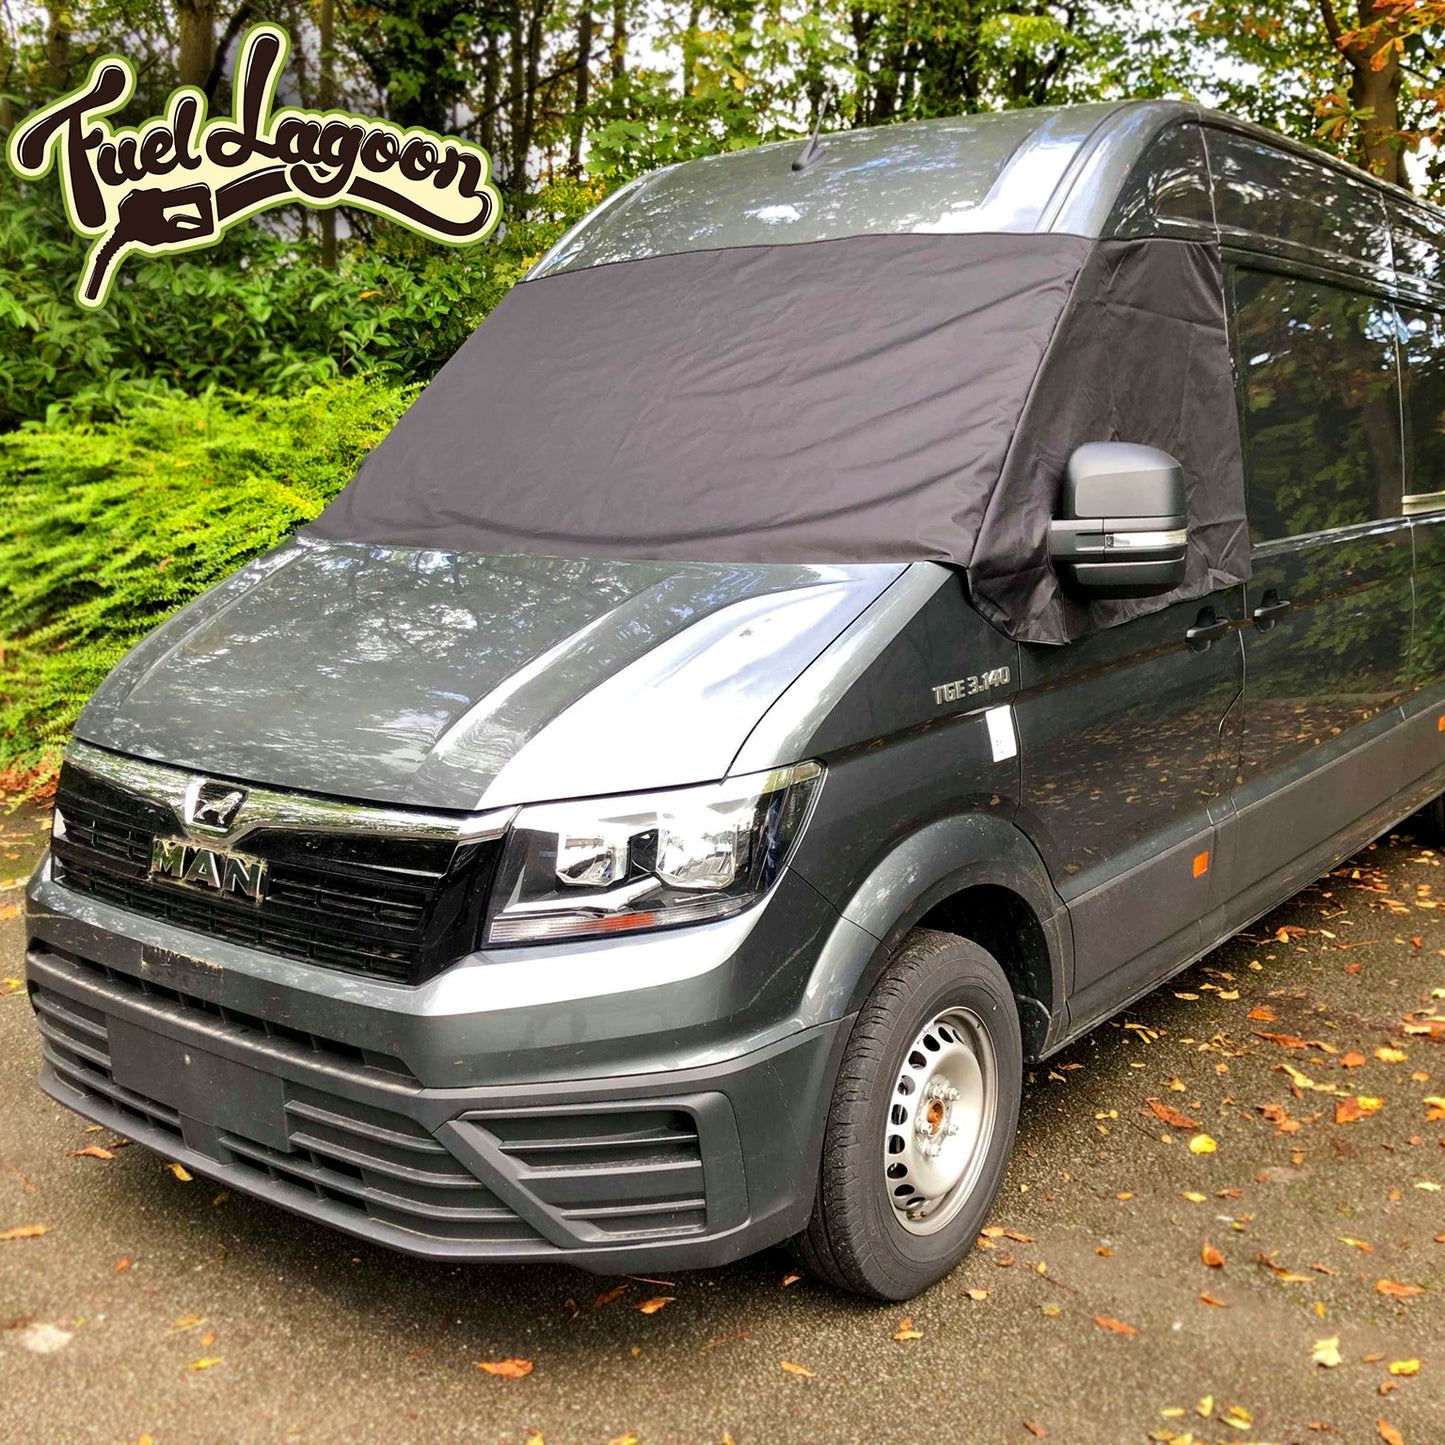 NEW VW Crafter 2017+ - Plain Deluxe